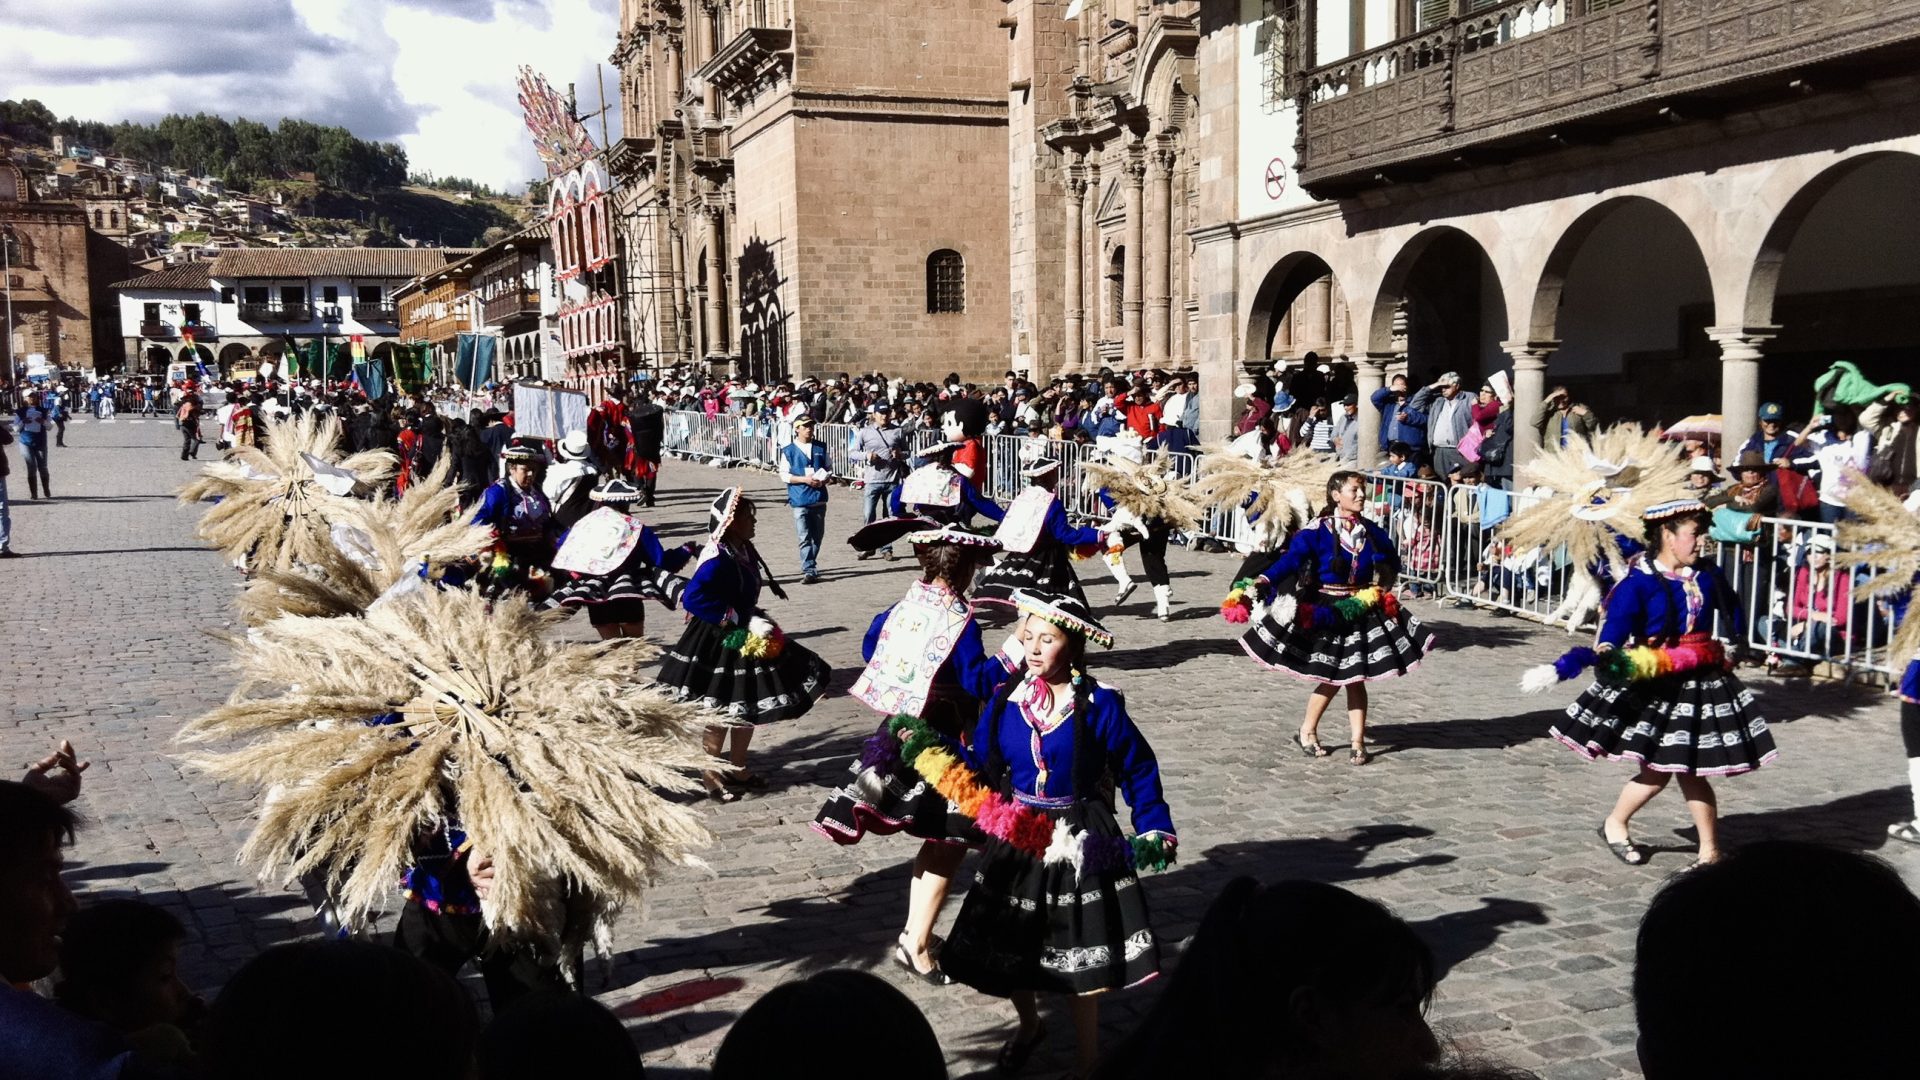 Street performers parade through the streets during Cusco's Inti Raymi festival.